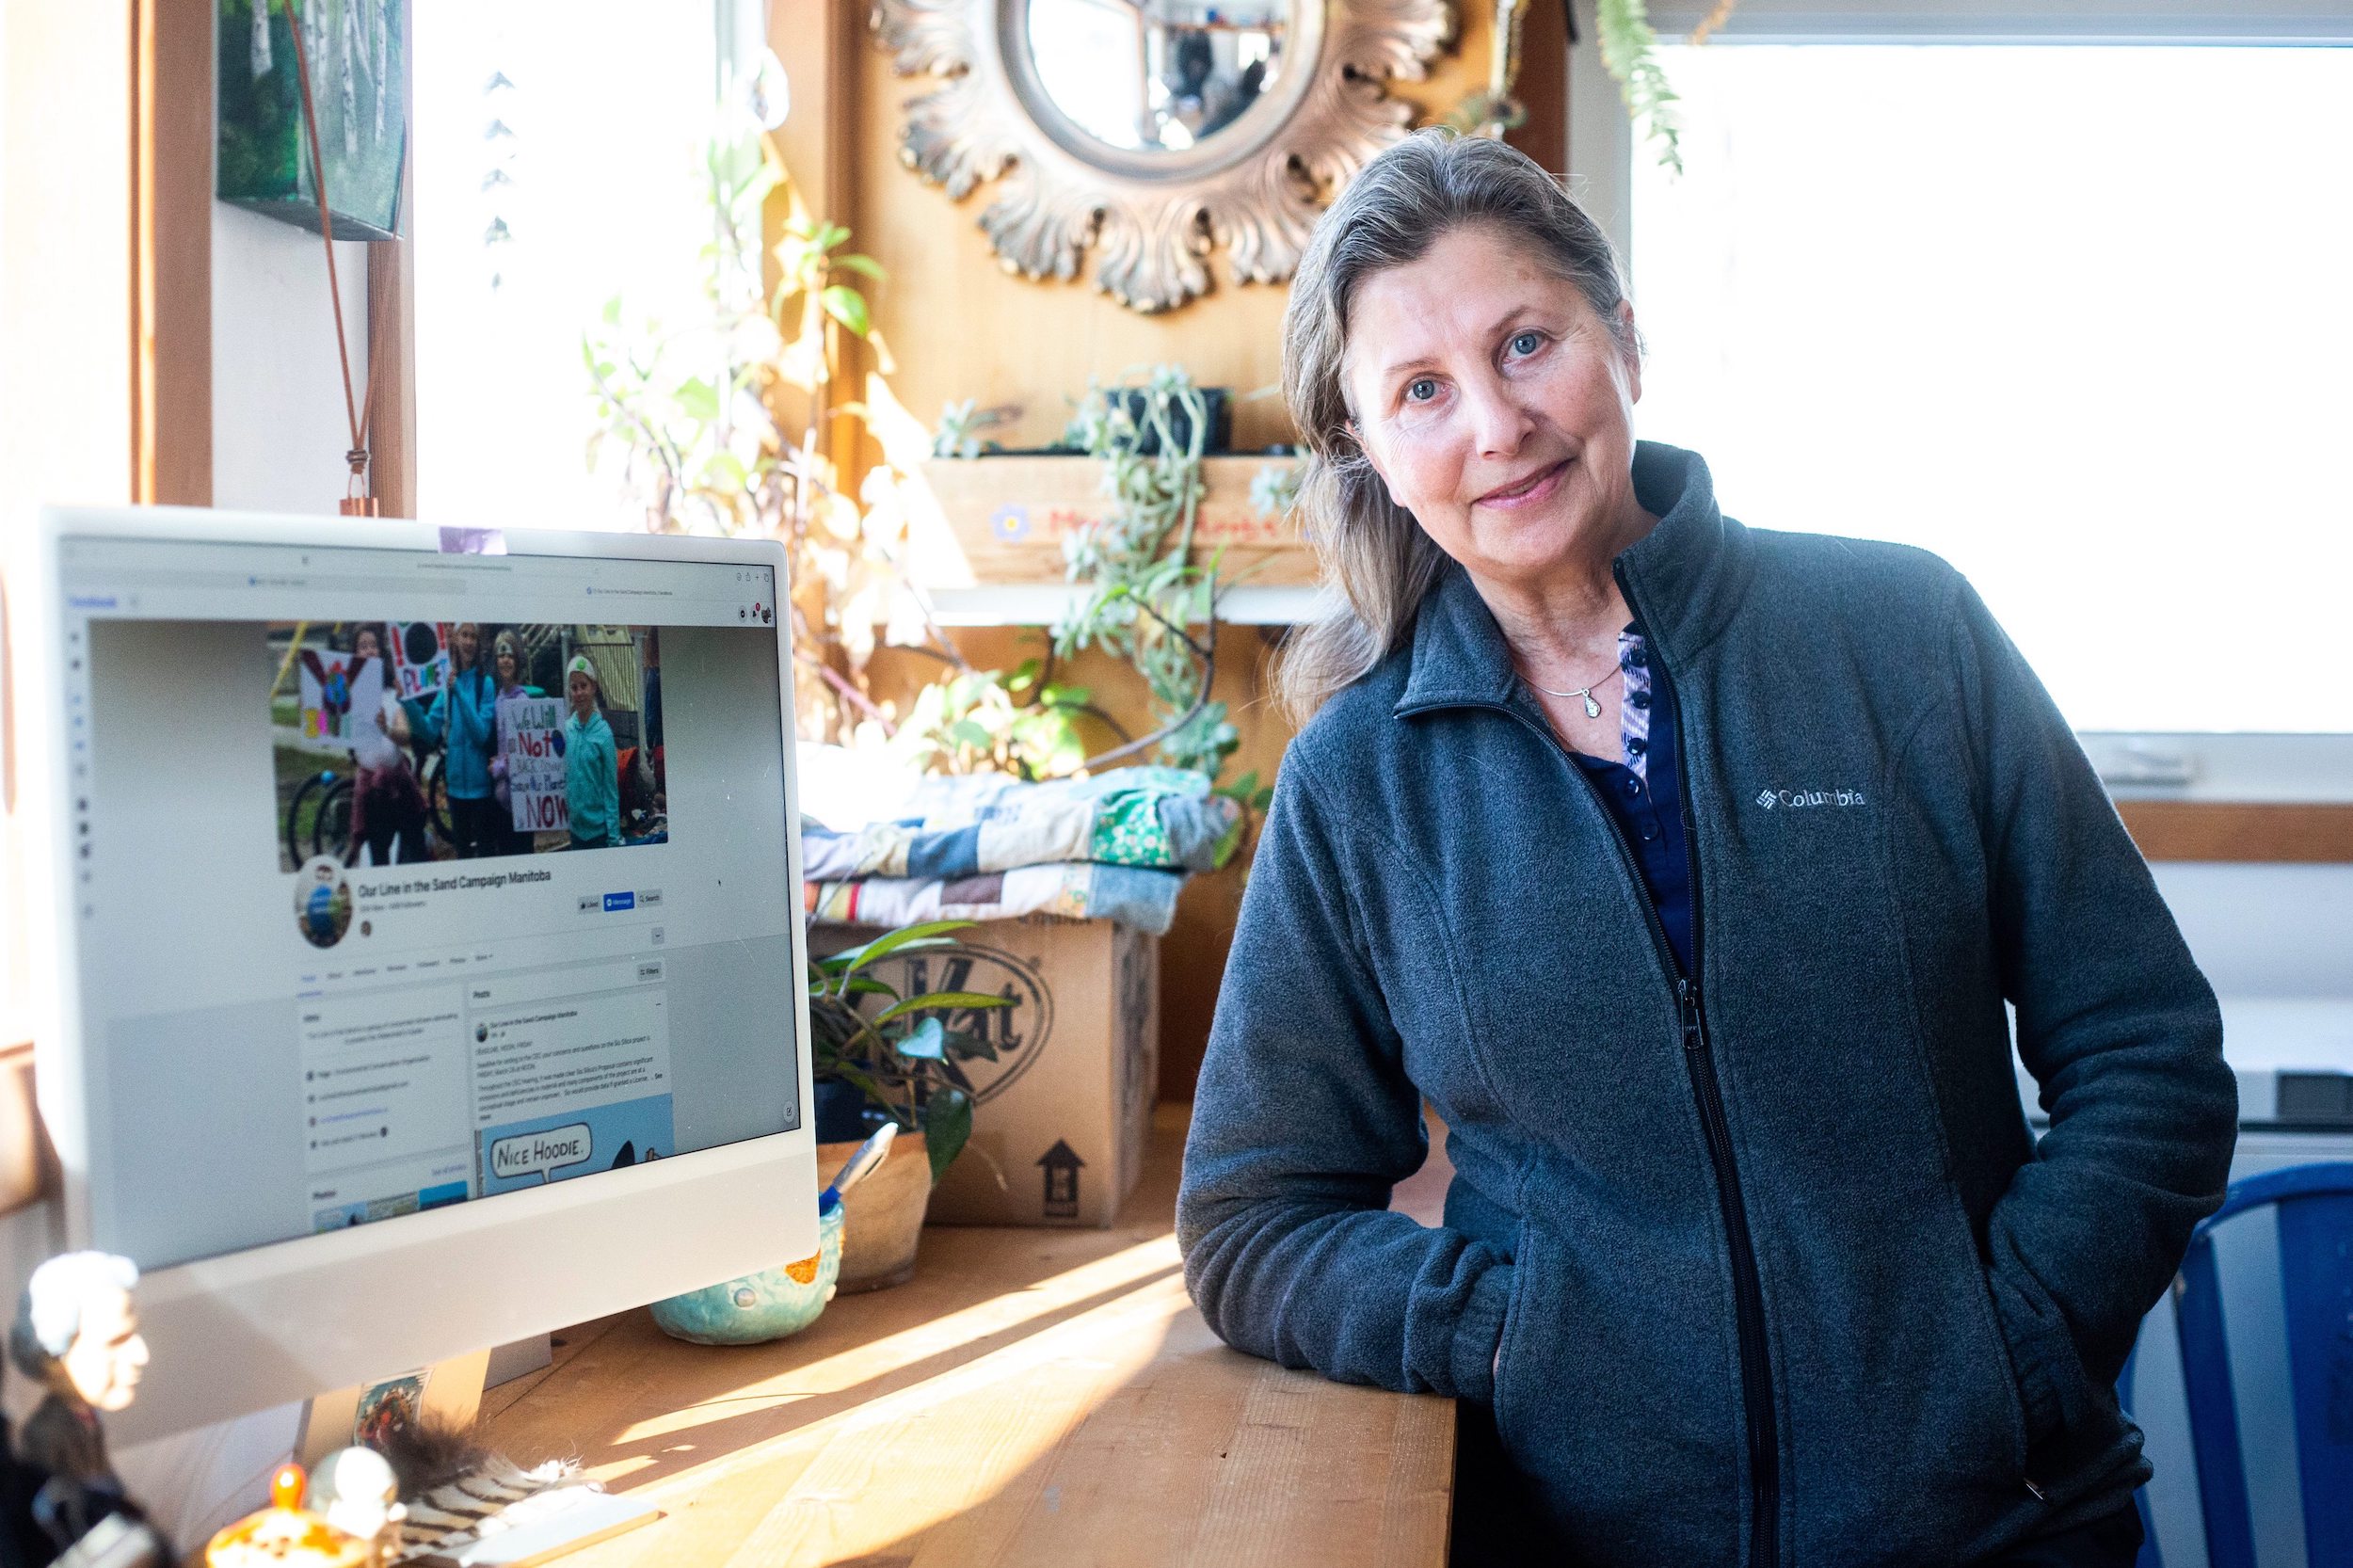 Tangi Bell, wearing a grey sweater, stands in her home office next to a computer displaying the Our Line in the Sand facebook page